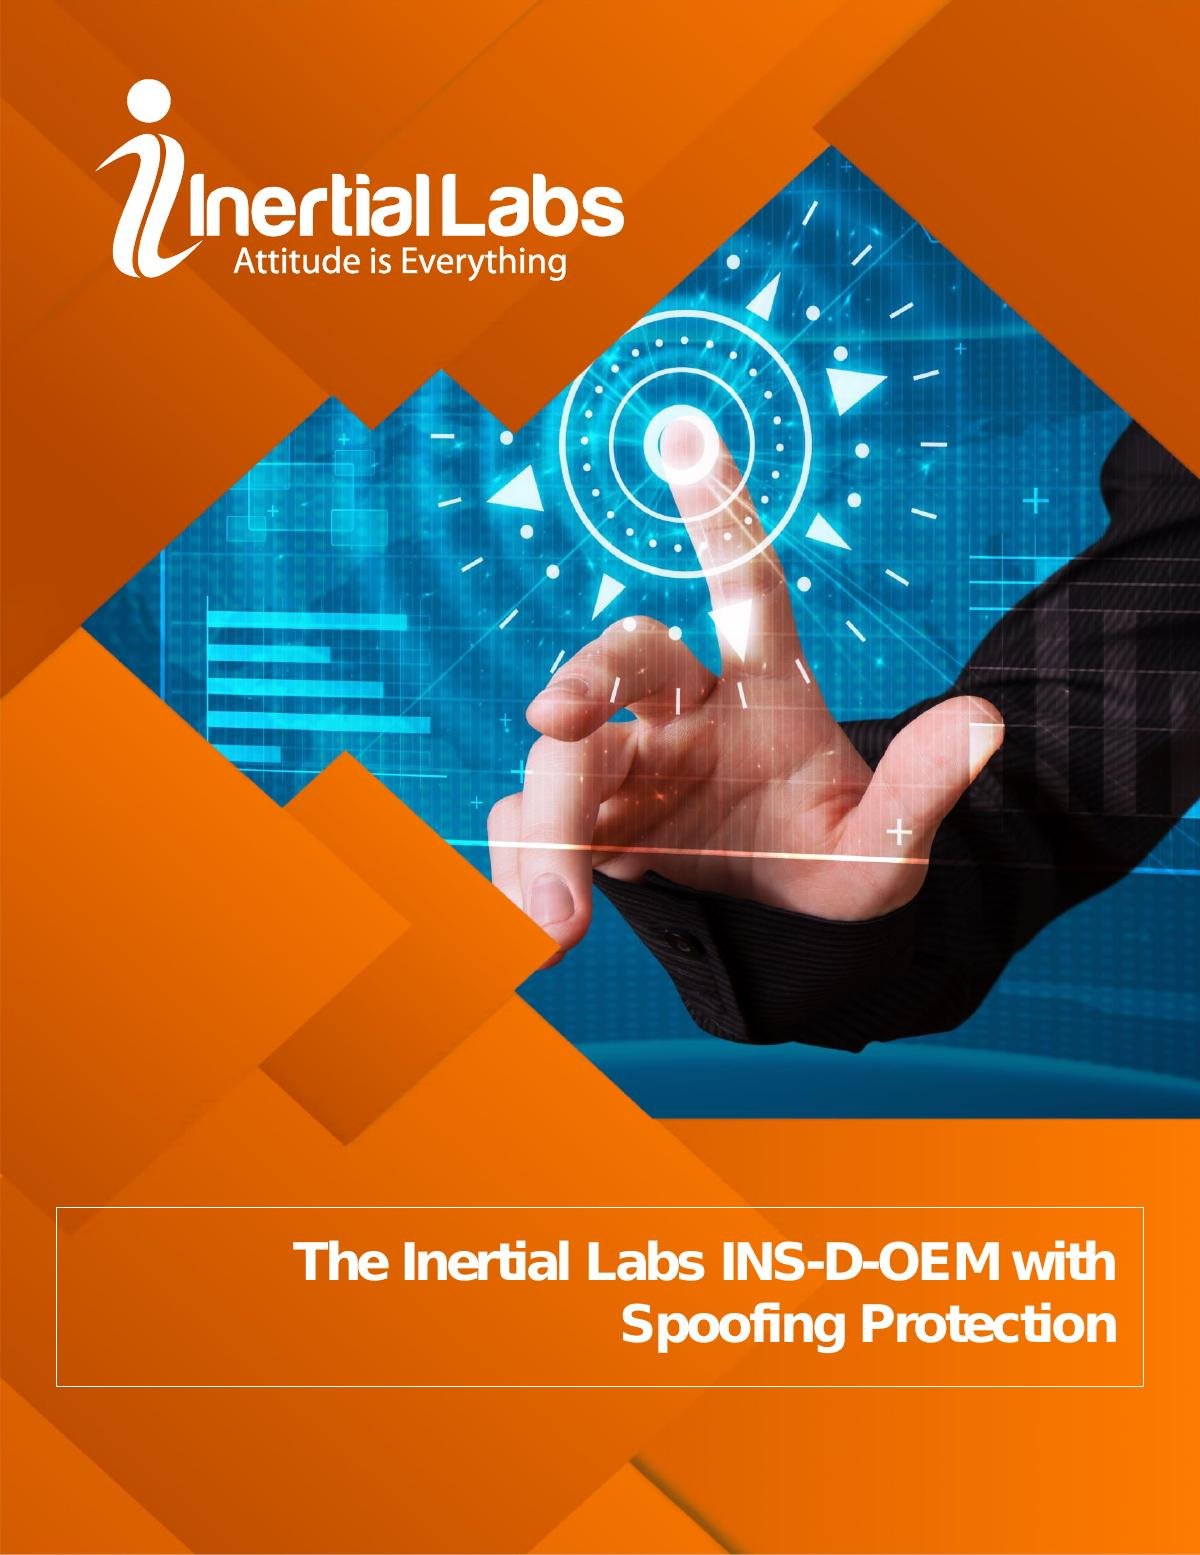 The Inertial Labs INS-D-OEM with Spoofing Protection